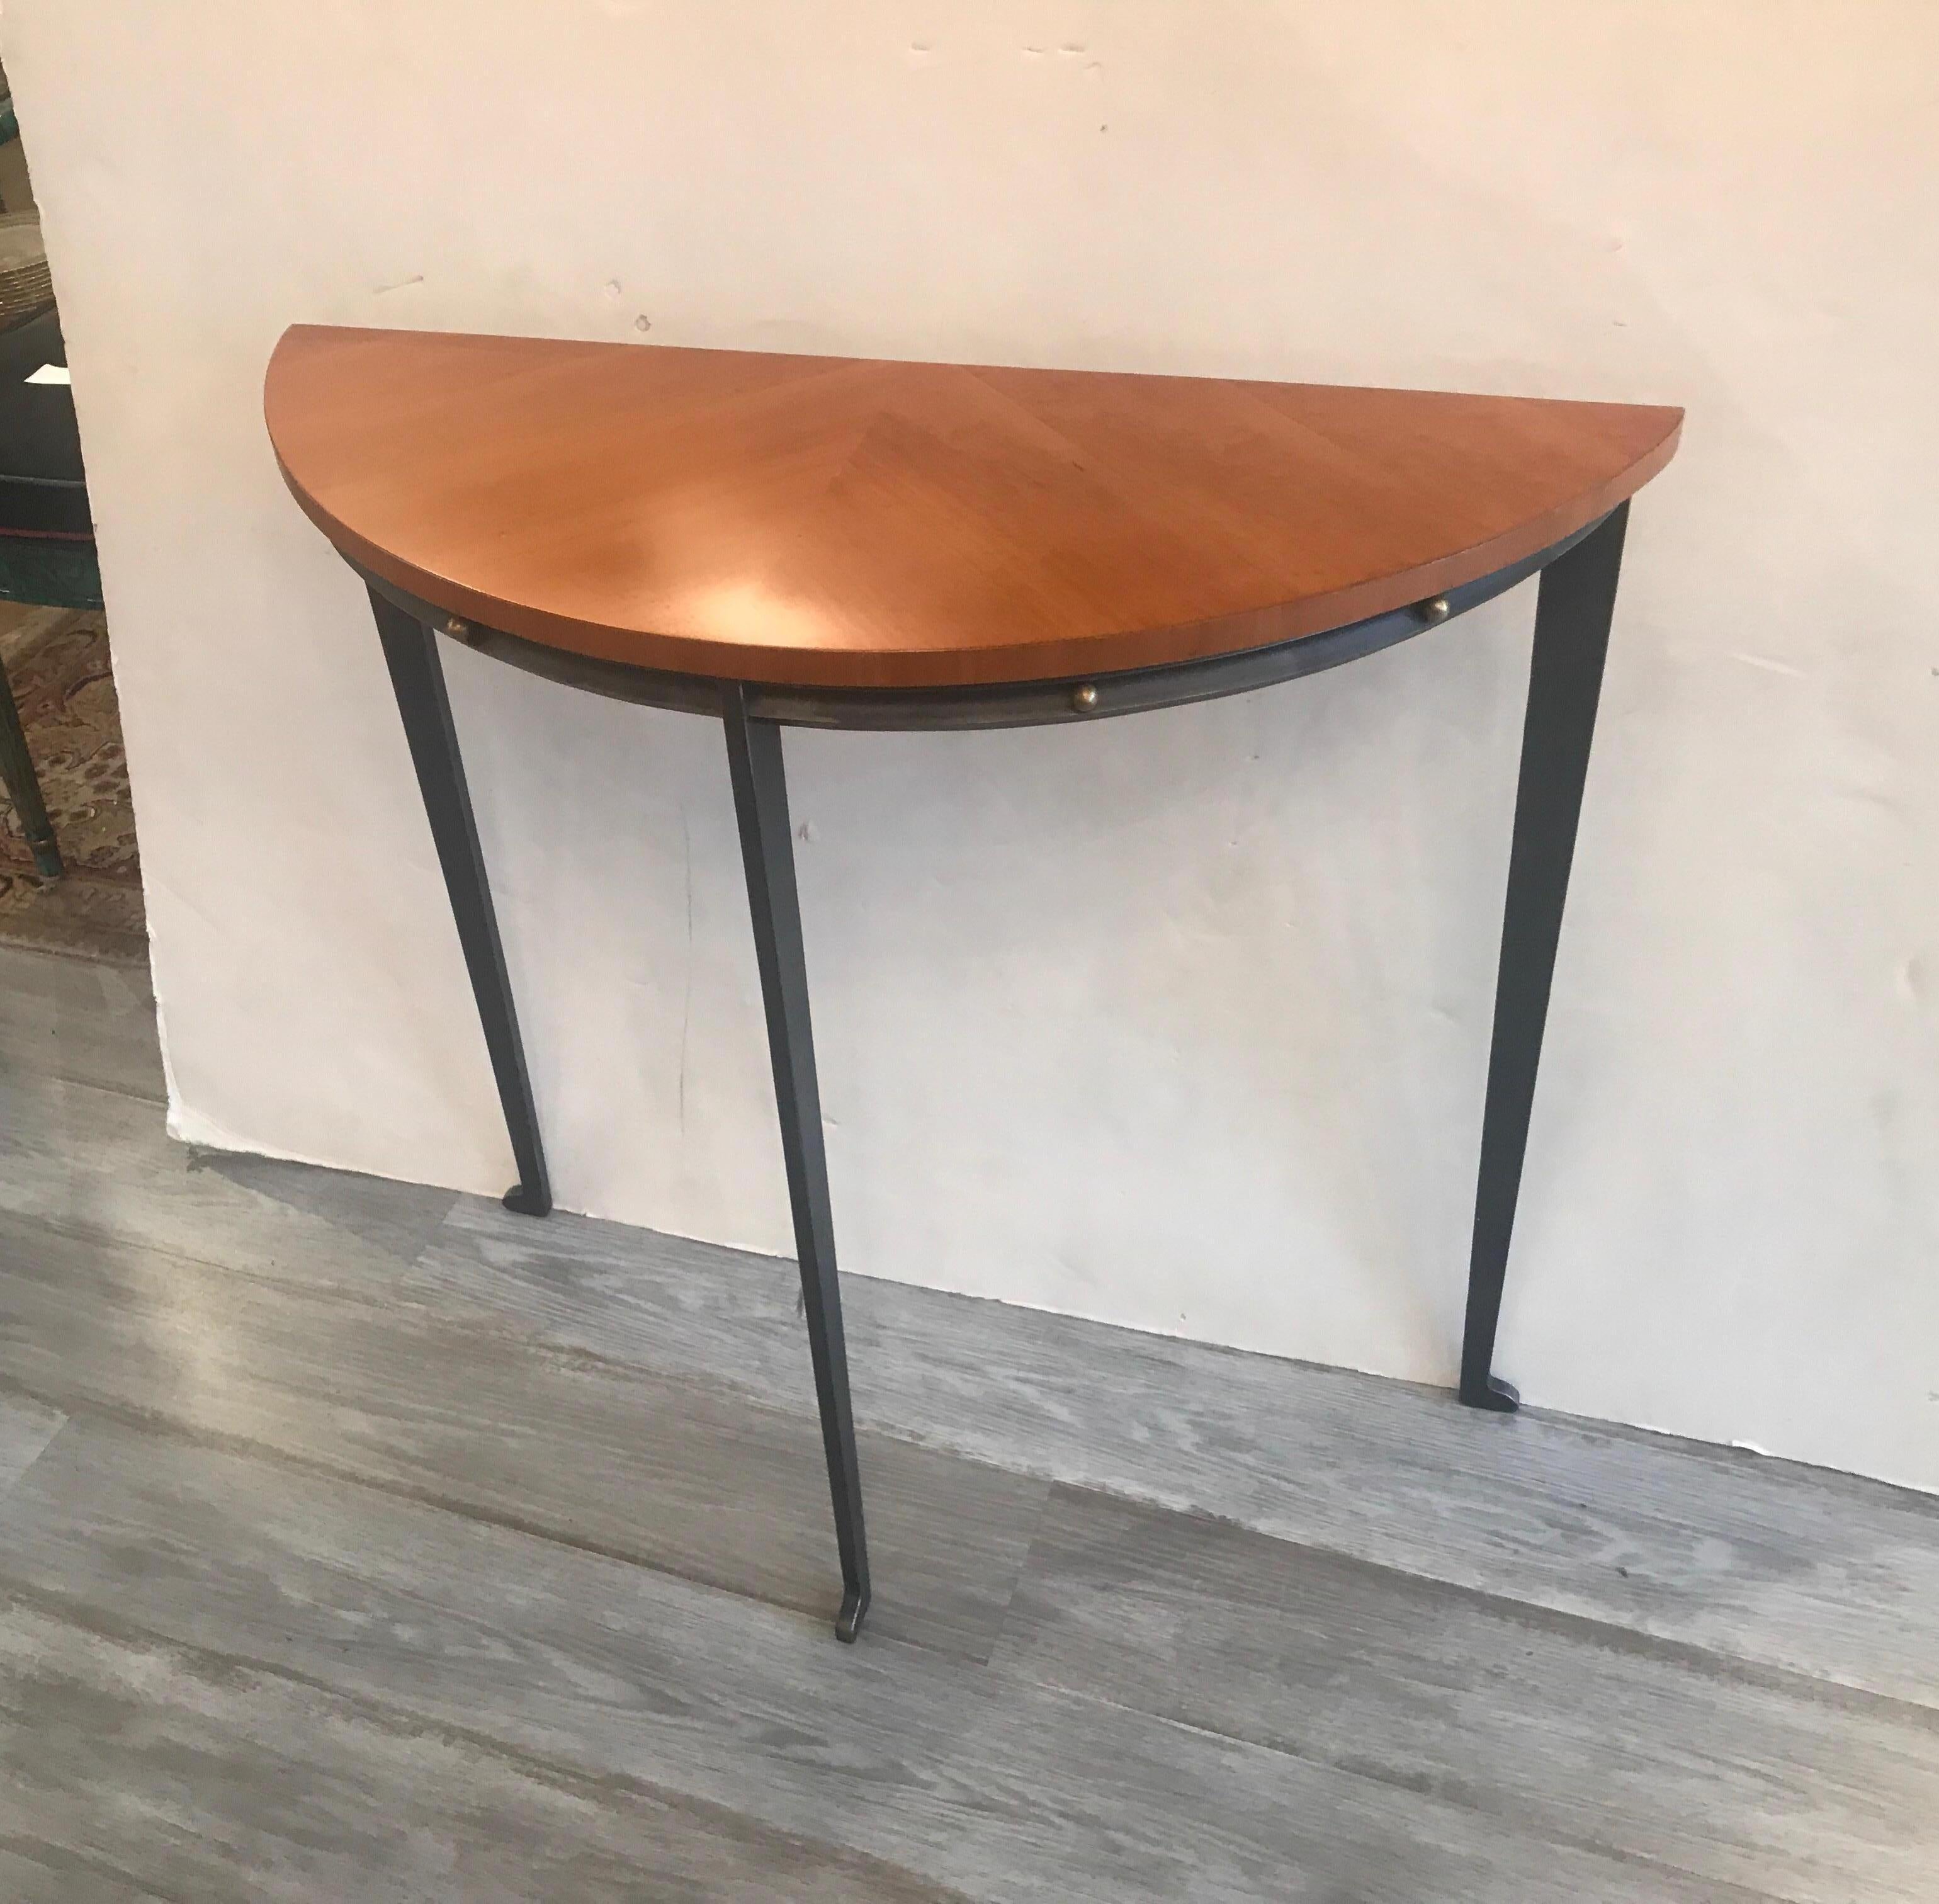 American Demilune Console Steel and Birch Table by Will Stone, NYC